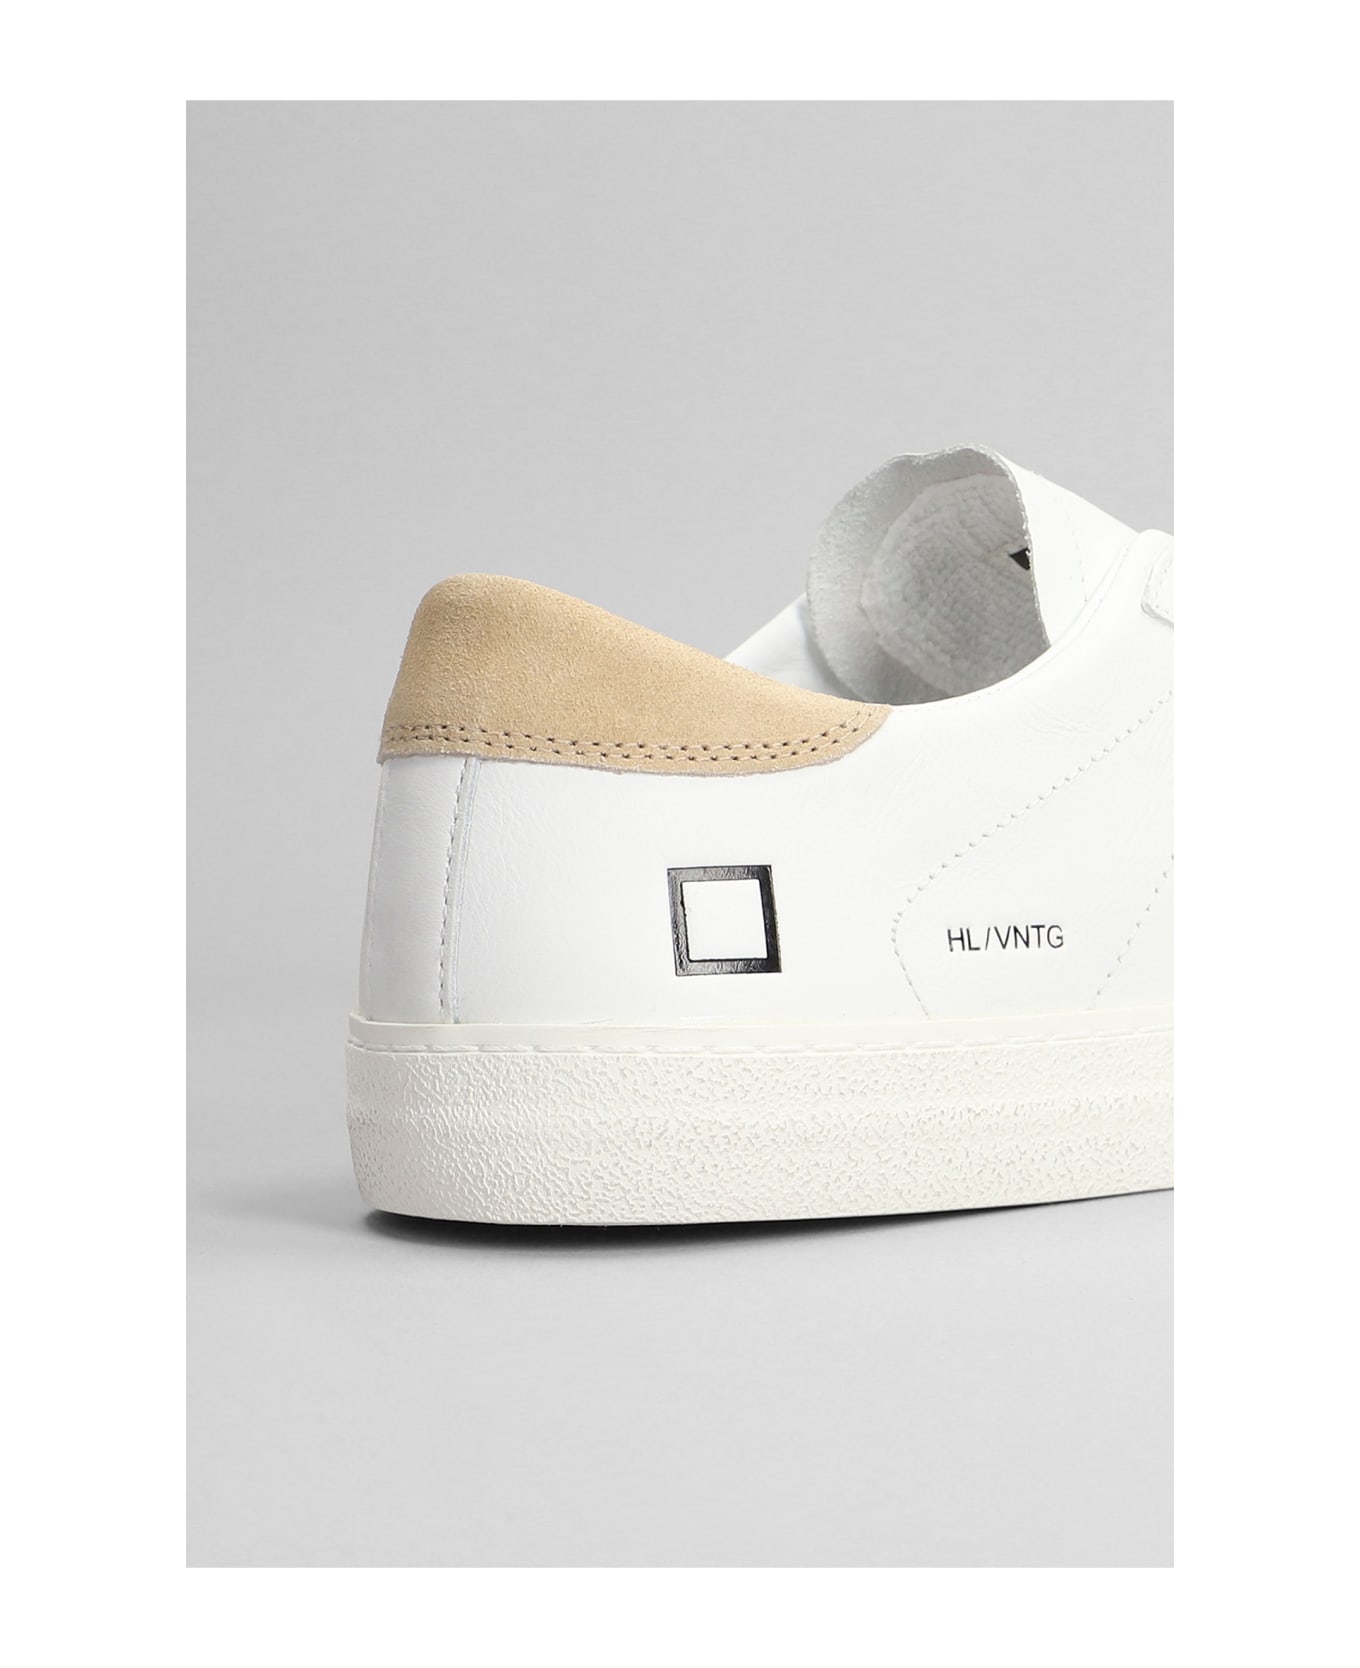 D.A.T.E. Hill Low Sneakers In White Leather - White スニーカー